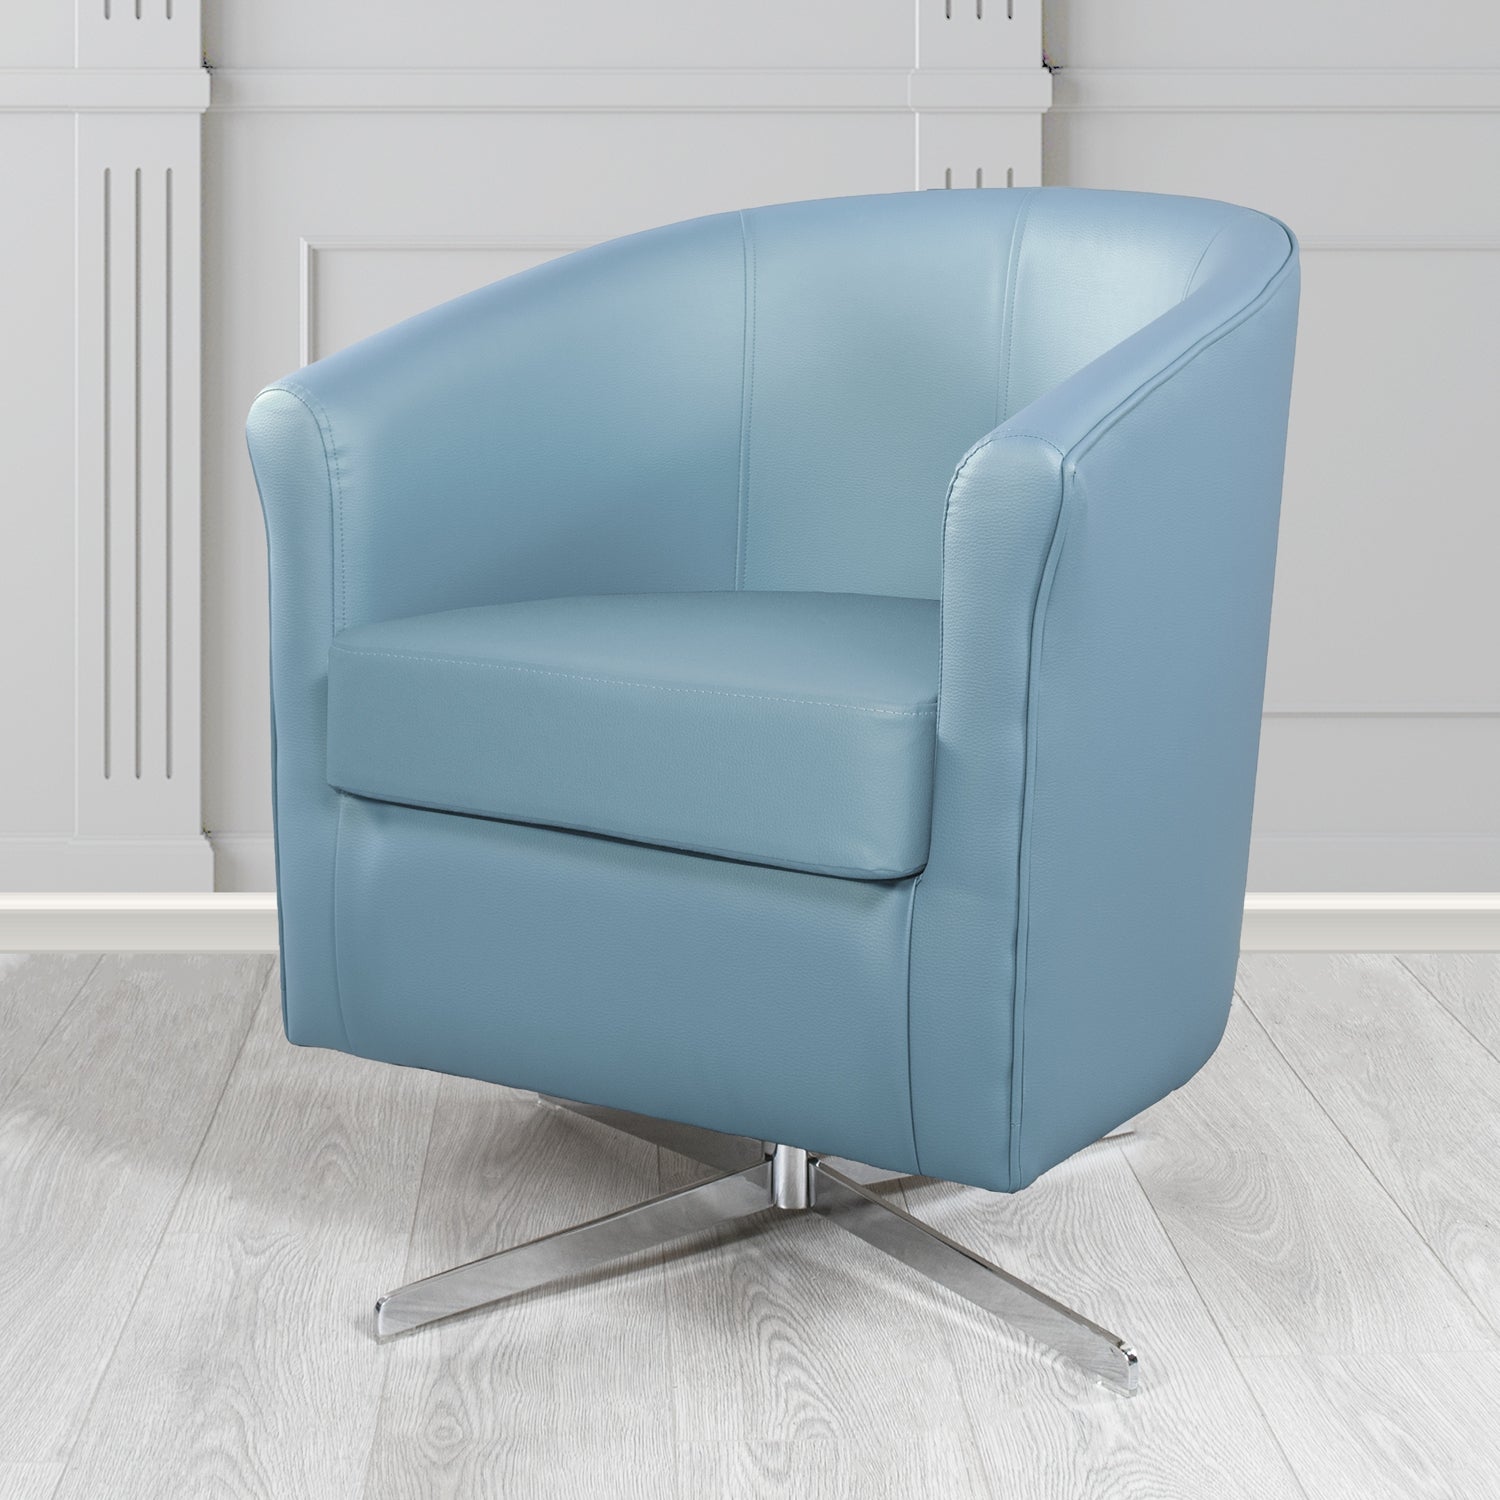 Cannes Swivel Tub Chair in Just Colour Cool Blue Crib 5 Faux Leather - The Tub Chair Shop